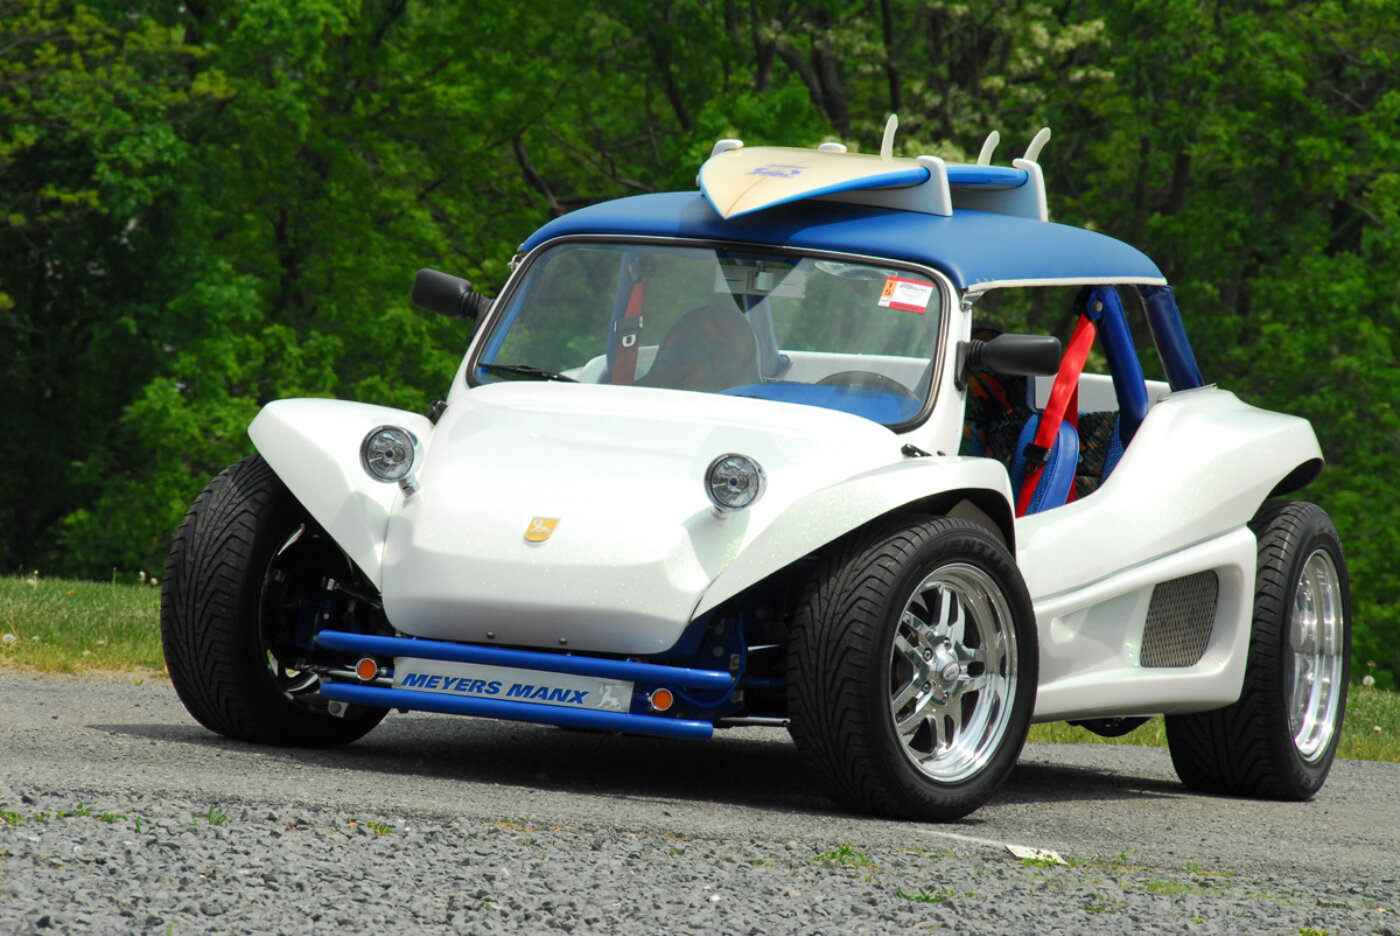 						Meyers Manxter Dune Buggy Project 1
			